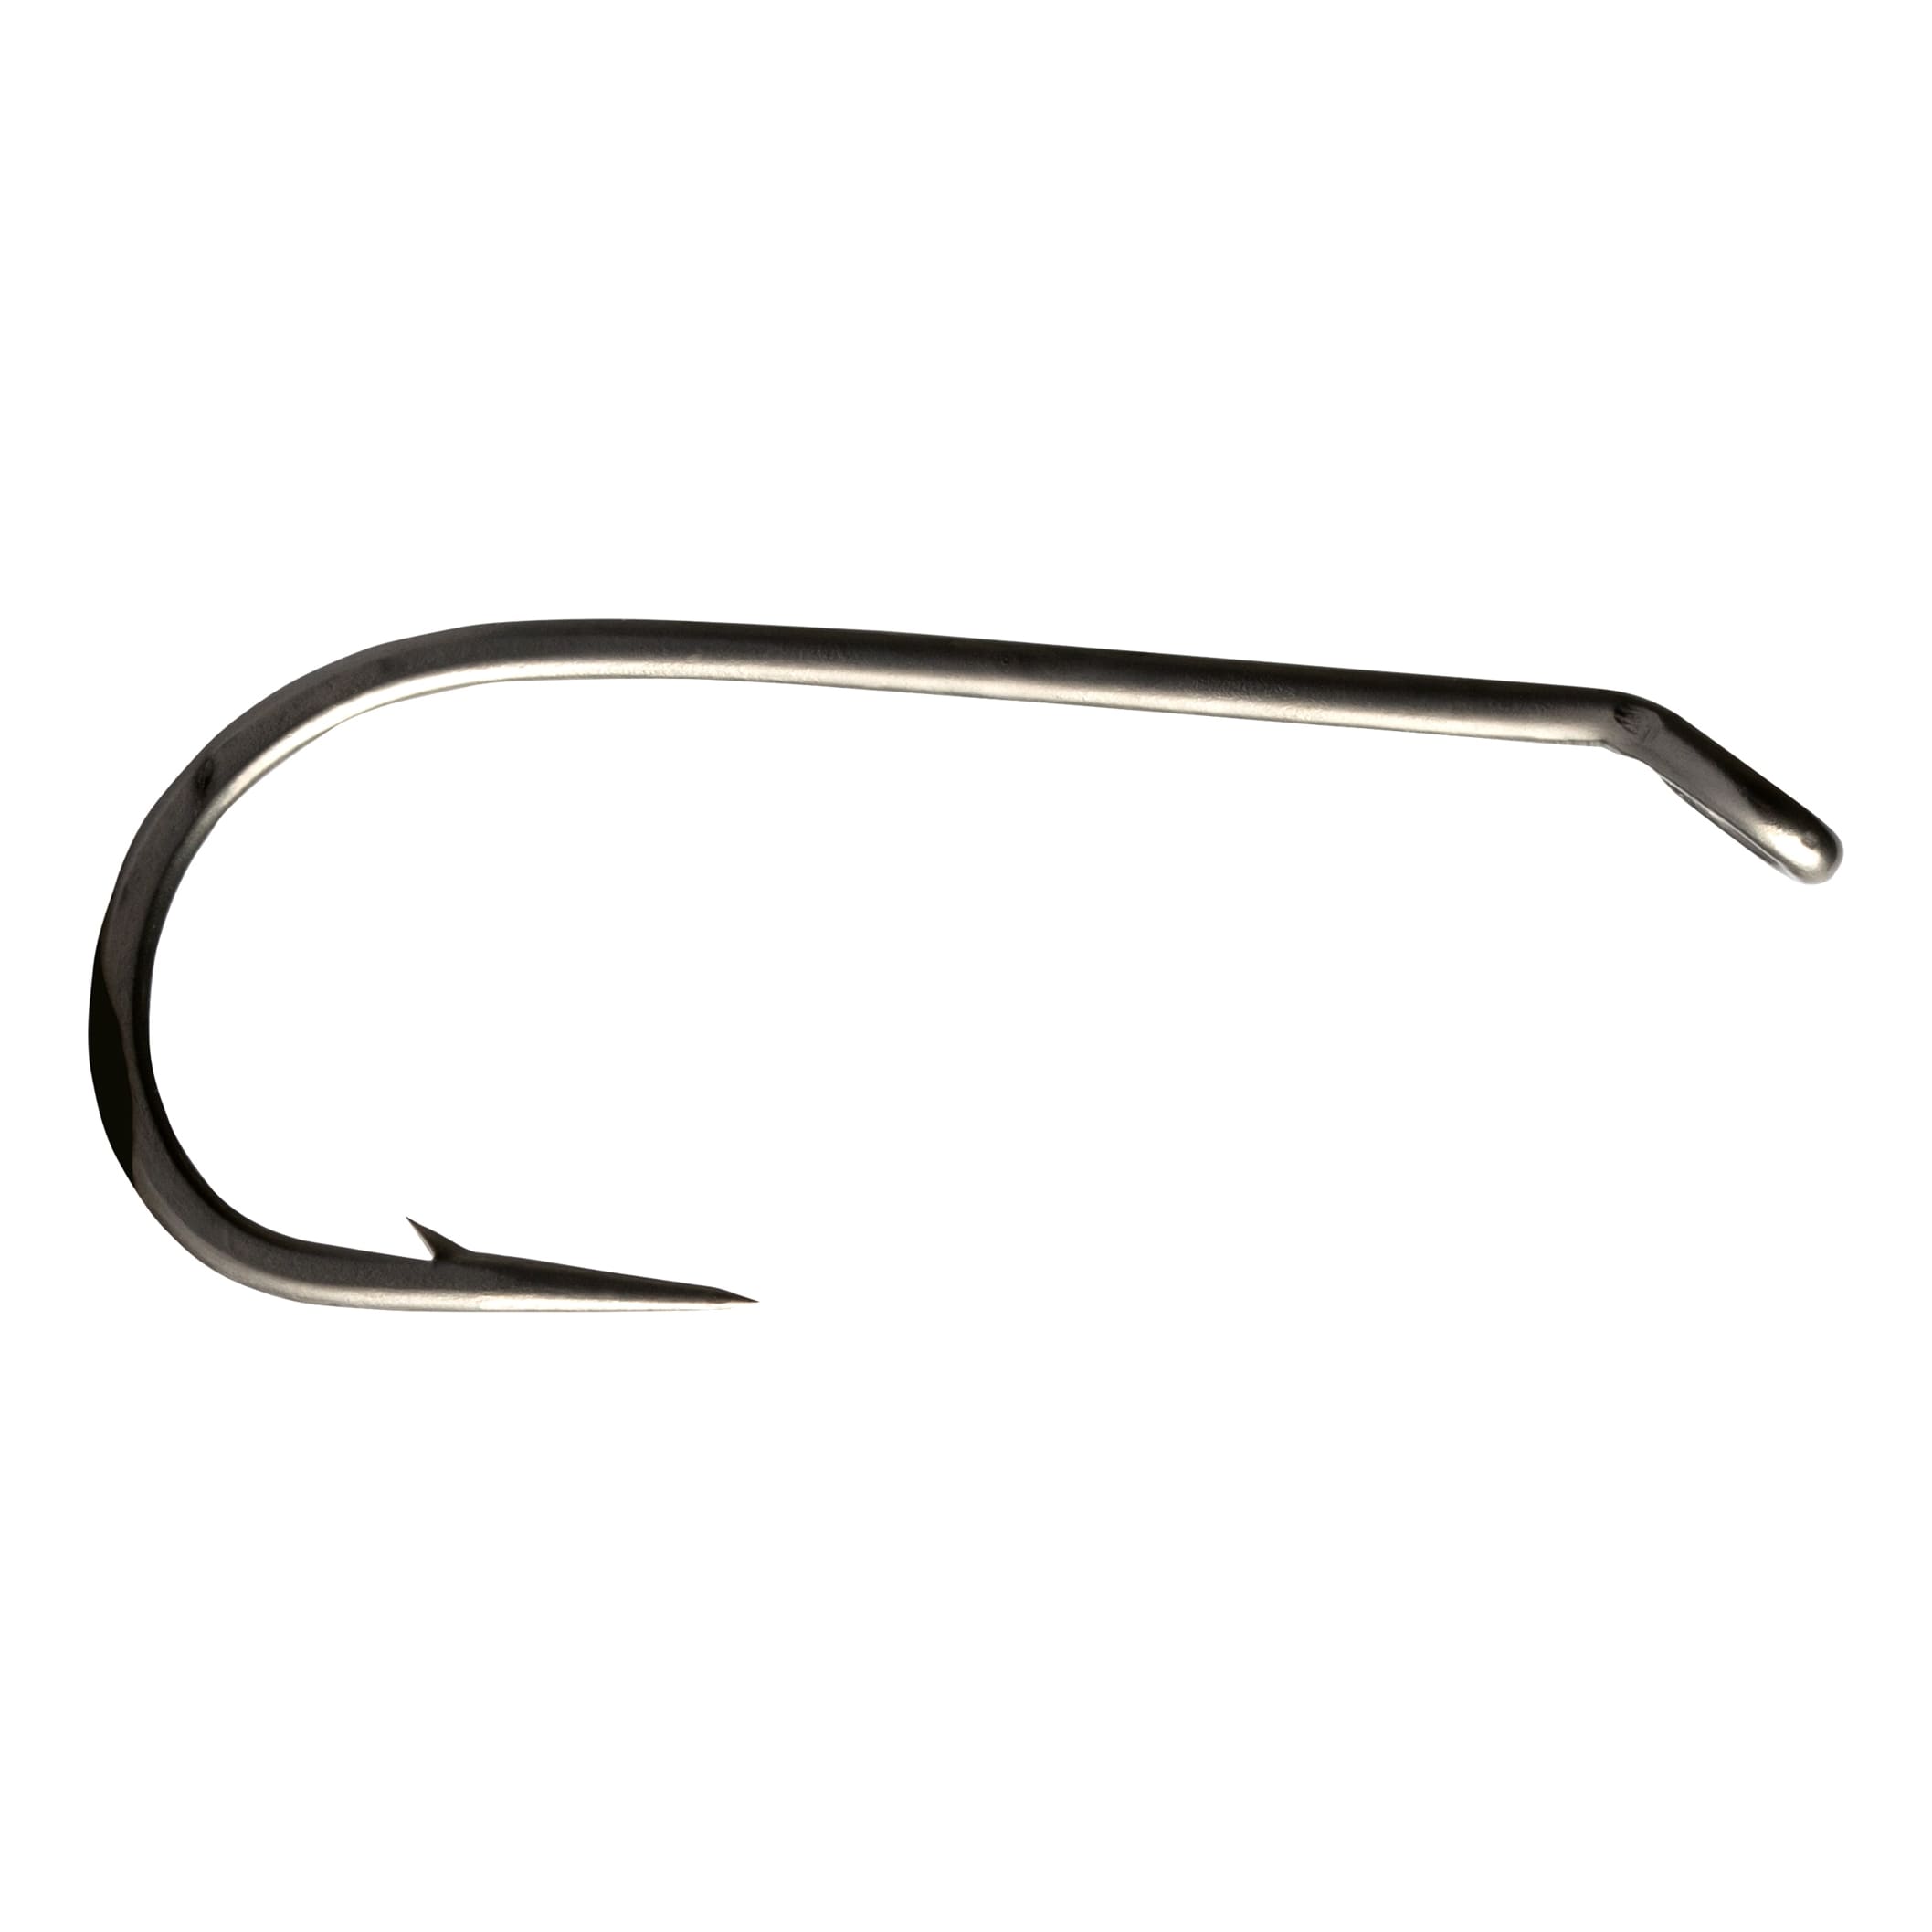 Mustad® Heritage Classic Dry-Fly Hook | Cabela's Canada